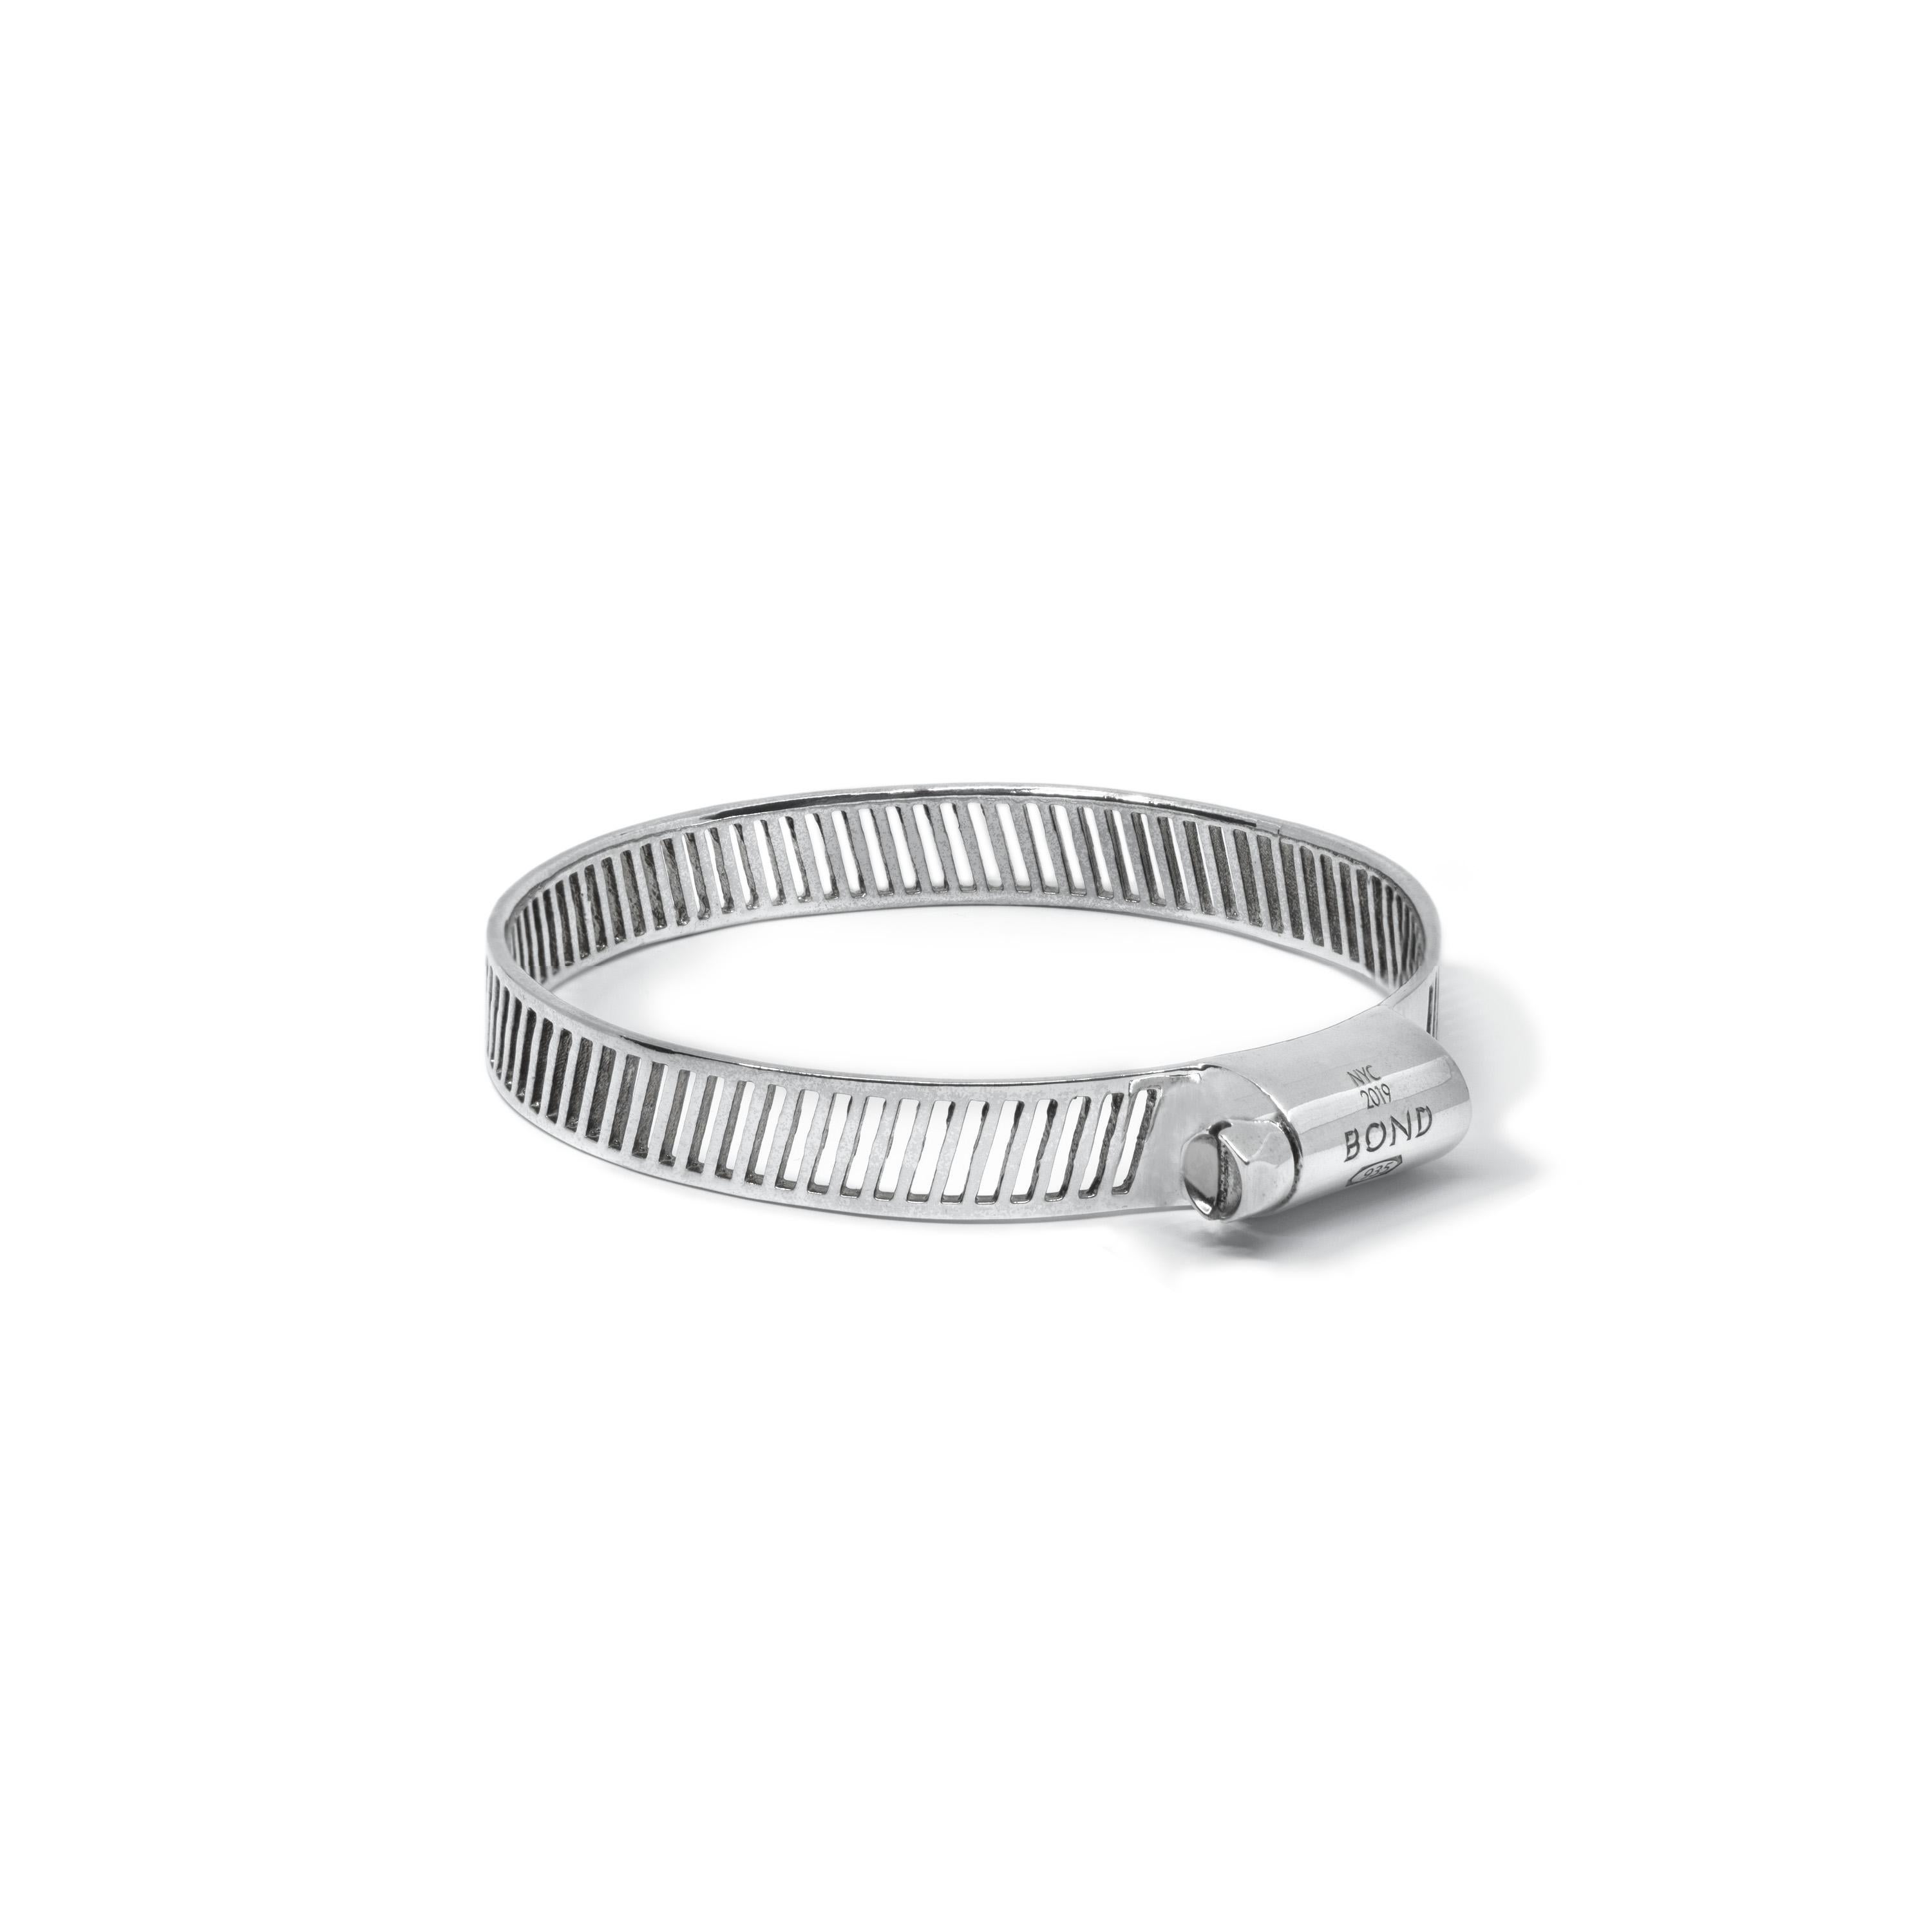 Breathable, slotted bangle with hose clamp hardware. Made in solid, hypoallergenic fine metals. Wear this bracelet alone or as part of a stack.

FEATURES
Available in sustainable, recycled metals: 935 Silver or 18K Gold.
Hypoallergenic,